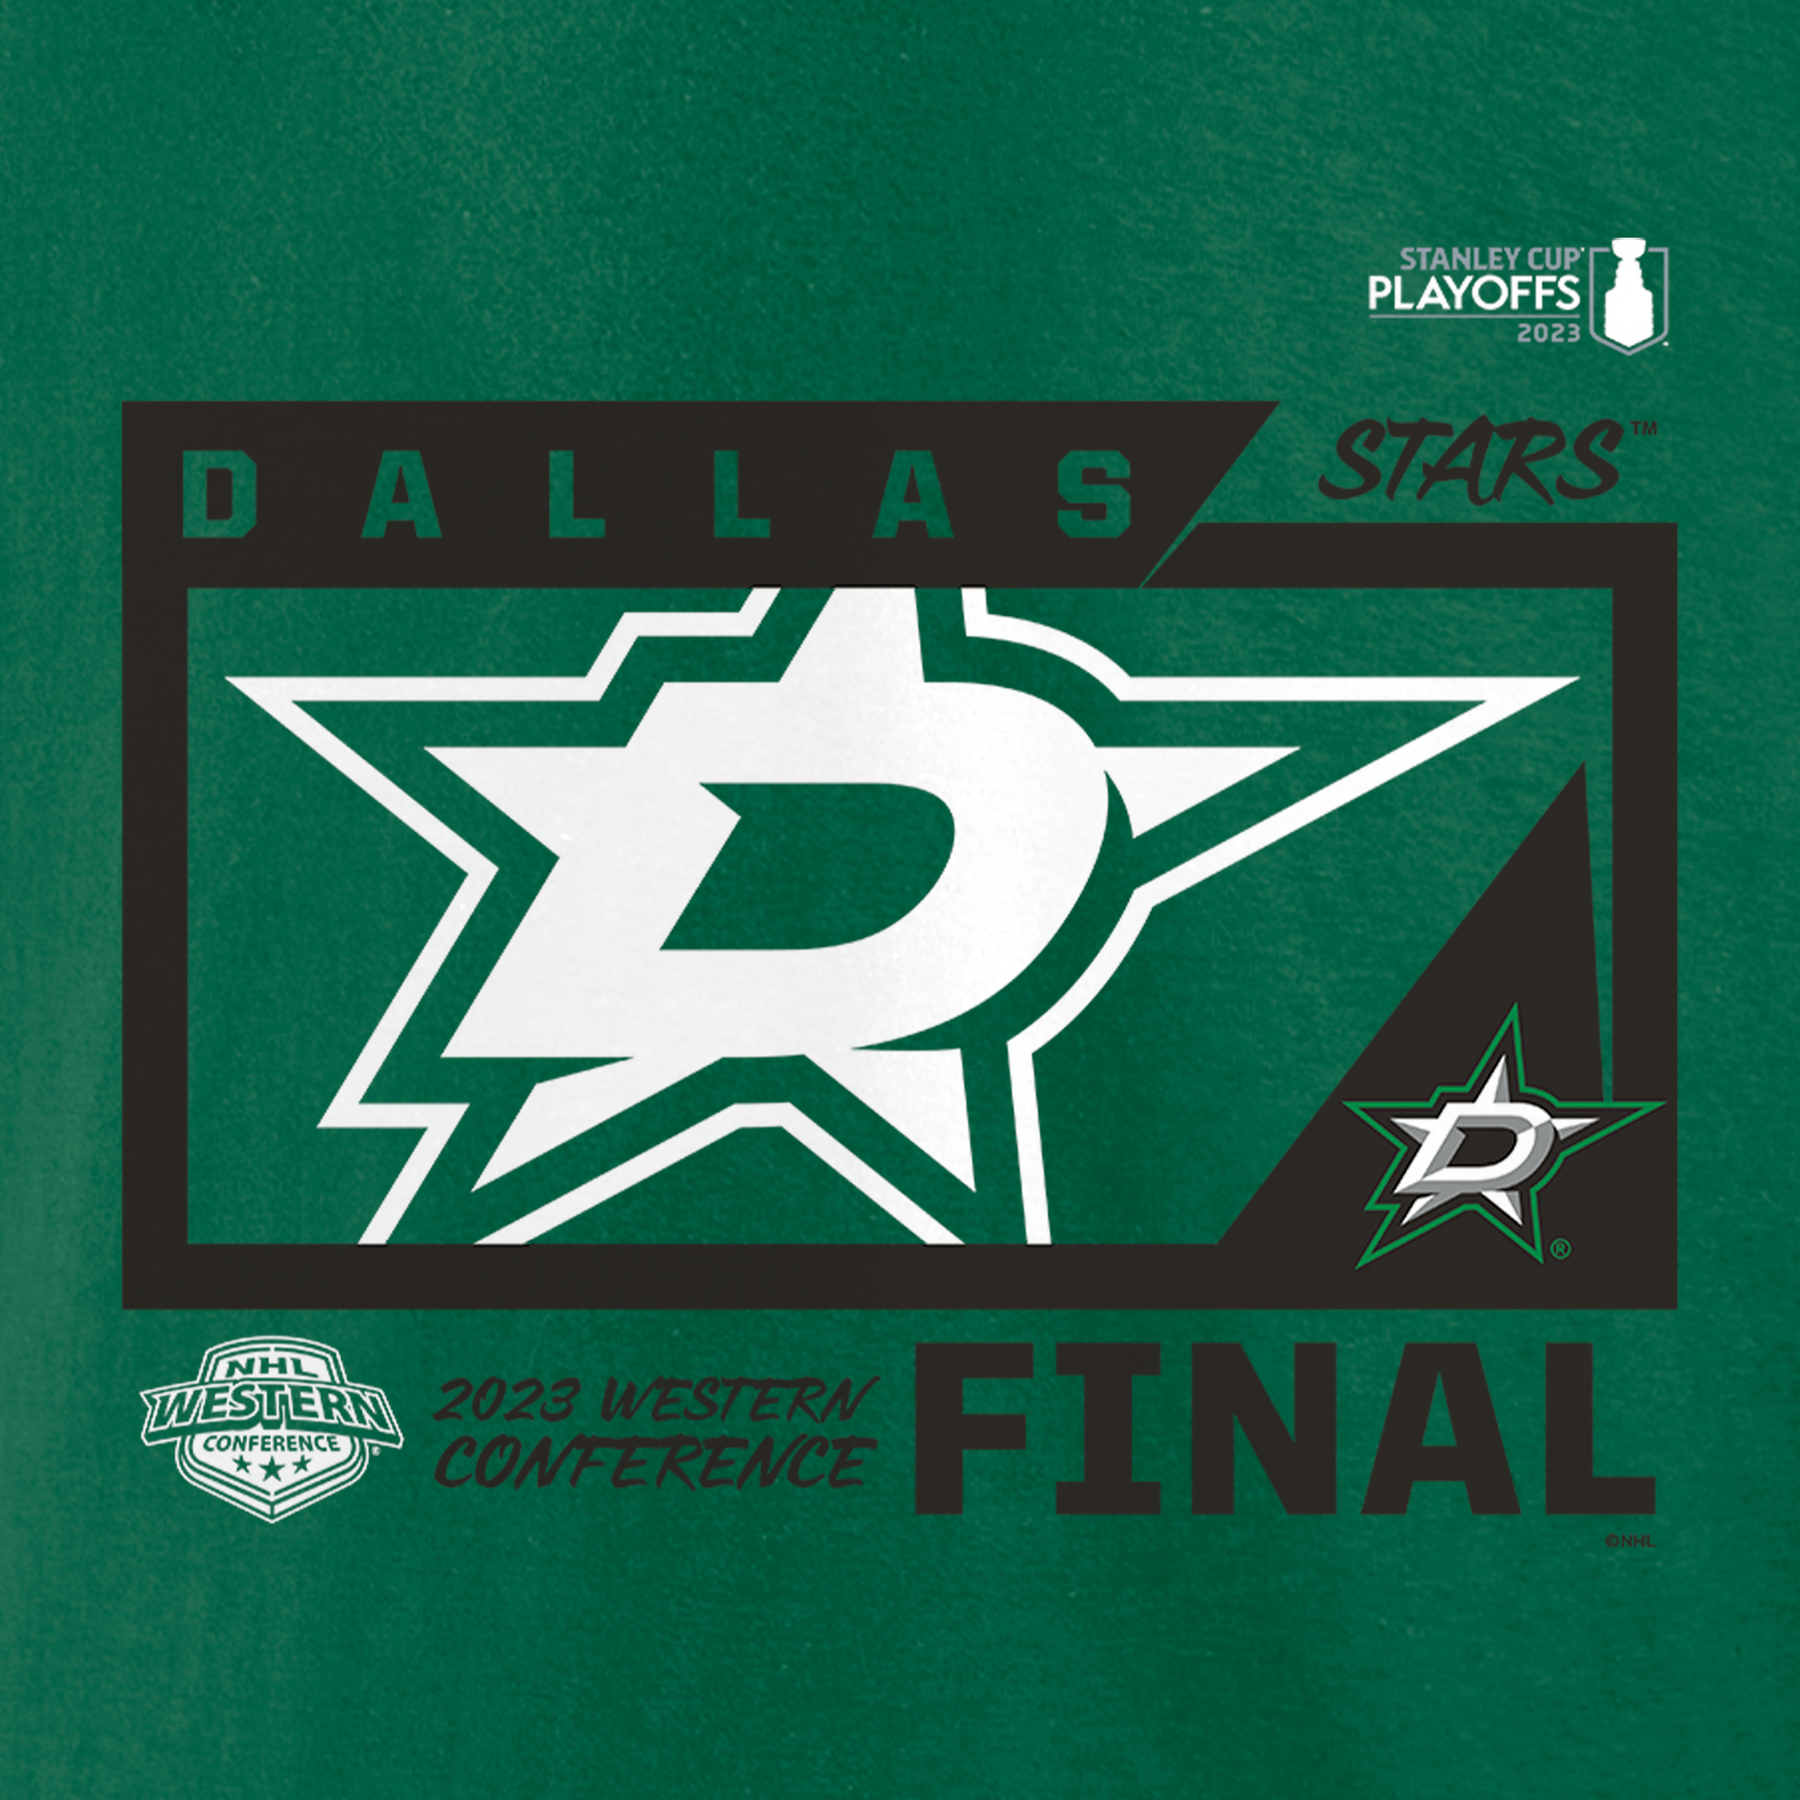 Vegas Golden Knights Vs Dallas Stars 2023 Stanley Cup Playoffs Western  Conference Final Shirt For Men And Women